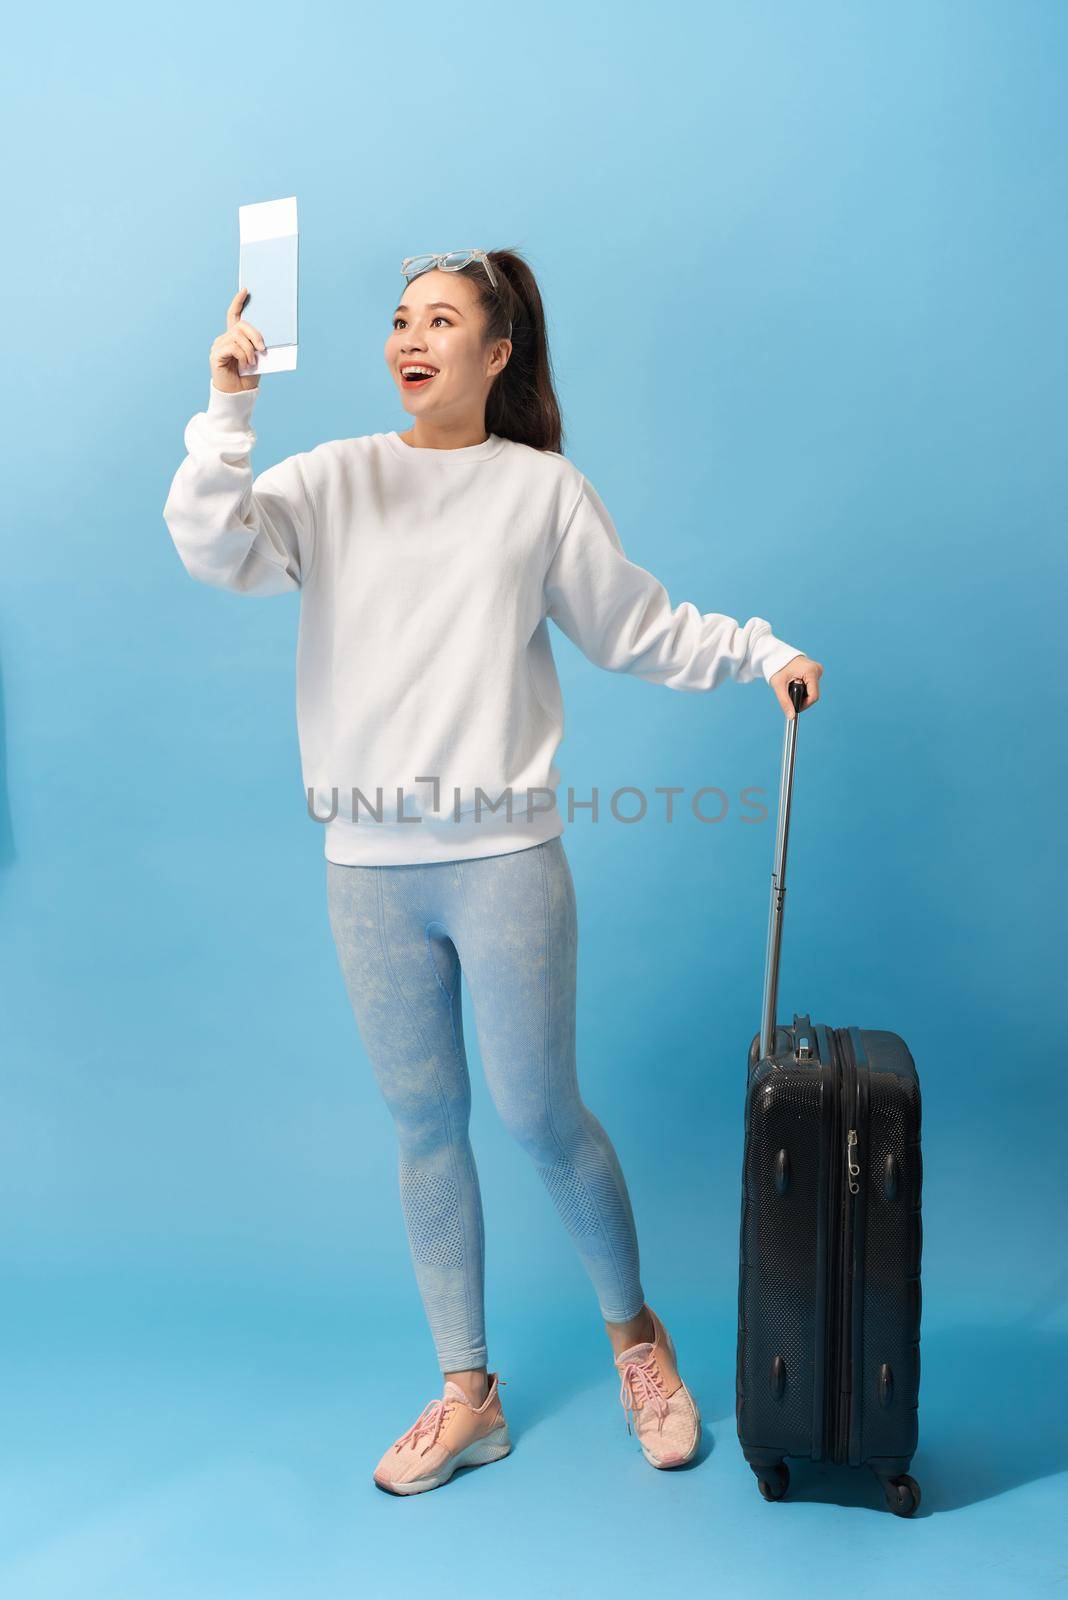 Tourism, summer holidays and vacation concept - Happy woman in casual clothing with travel bag and air ticket over blue background by makidotvn